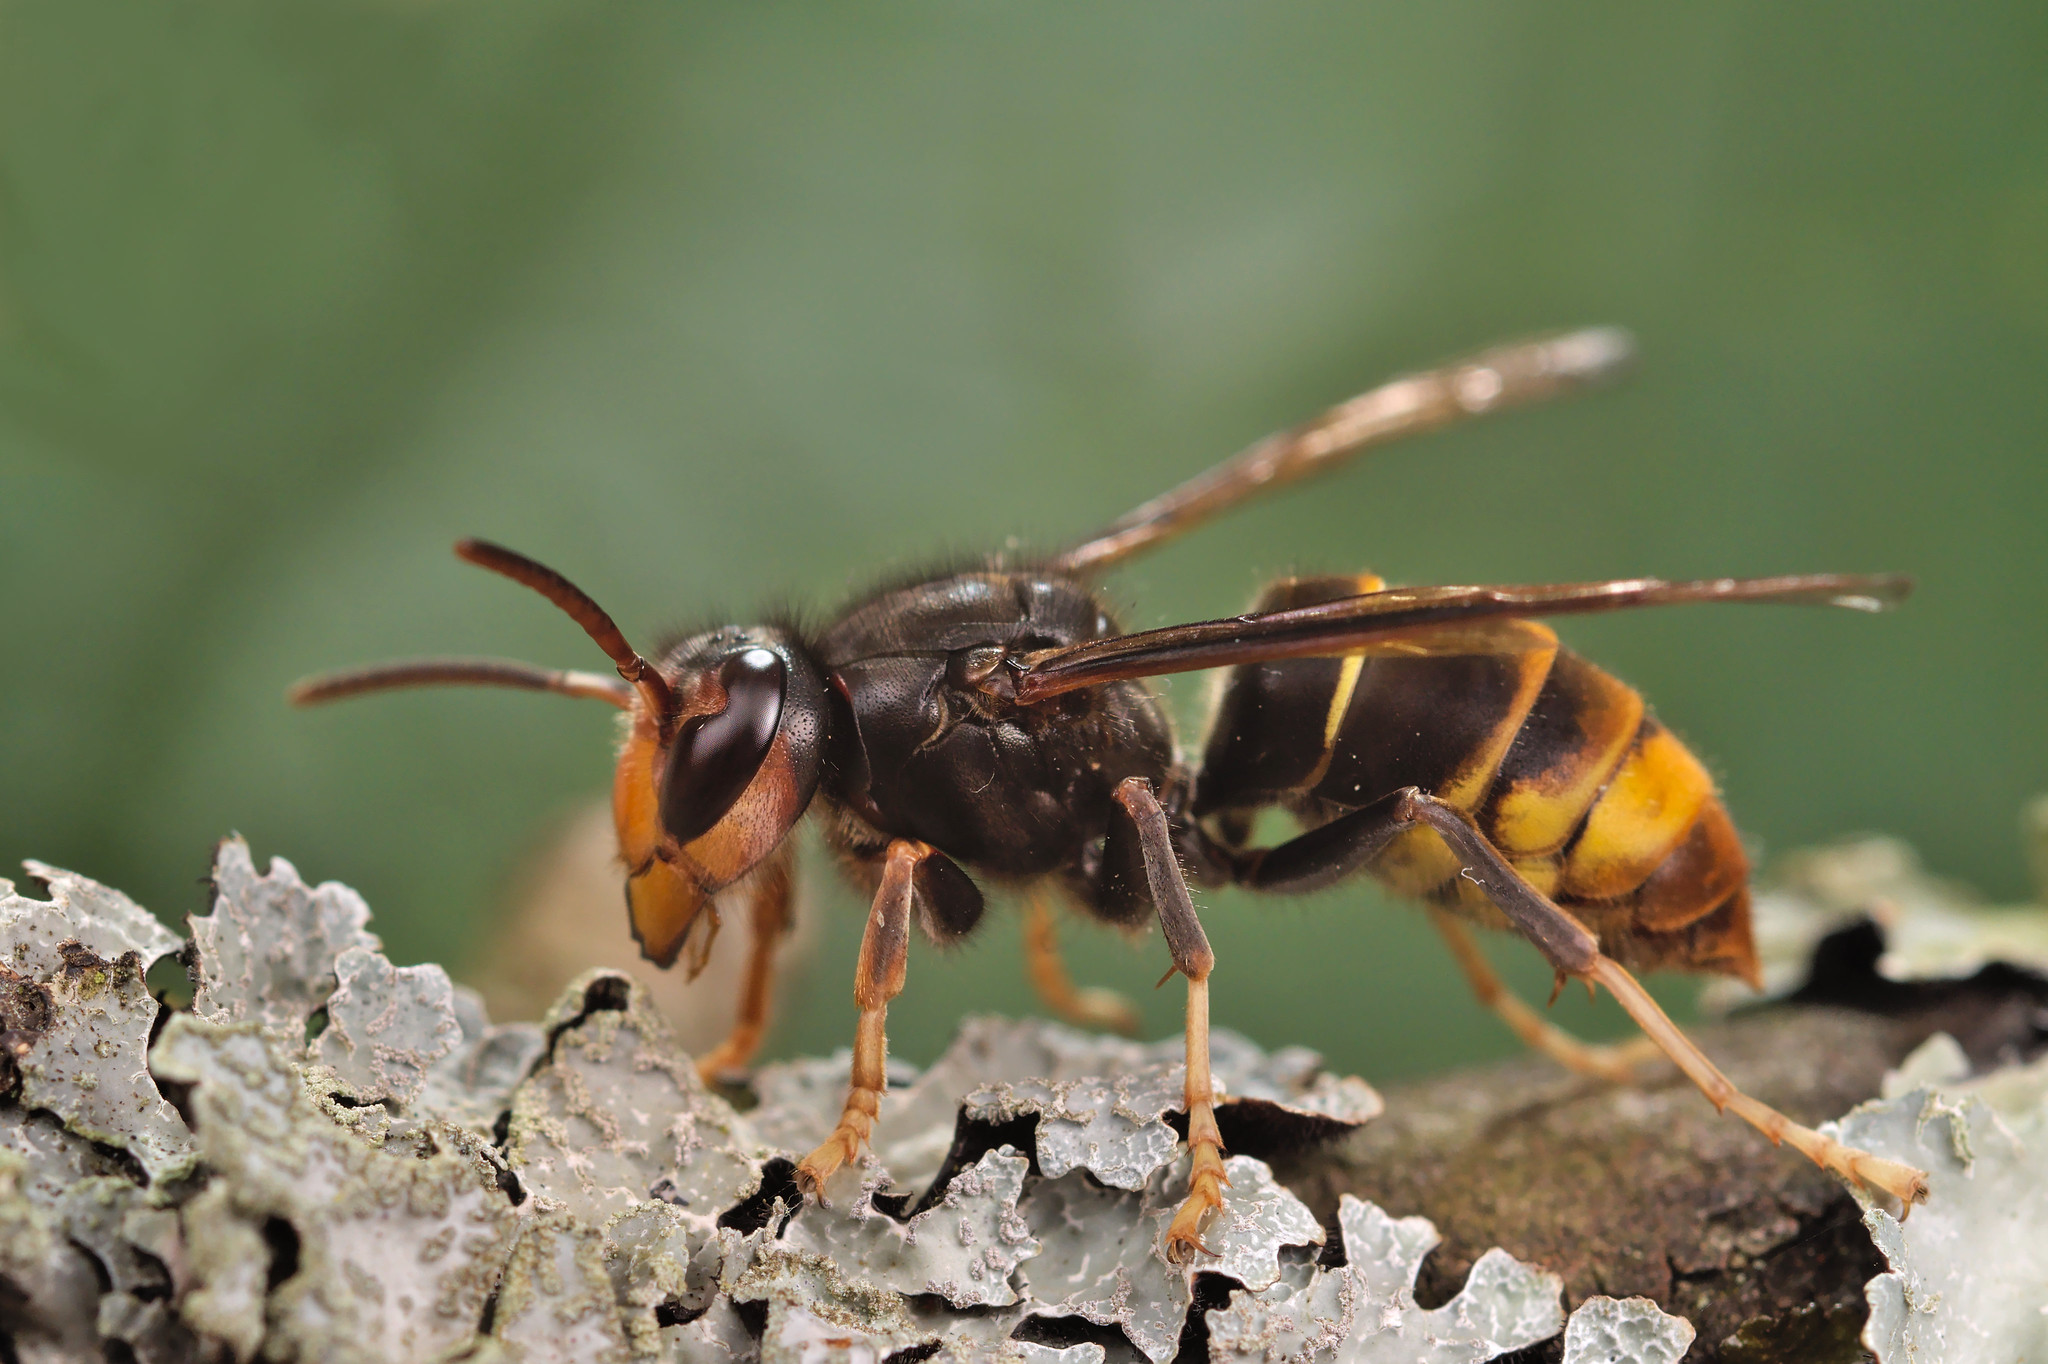 Close up photo of an Asian hornet stood on some moss on a branch.